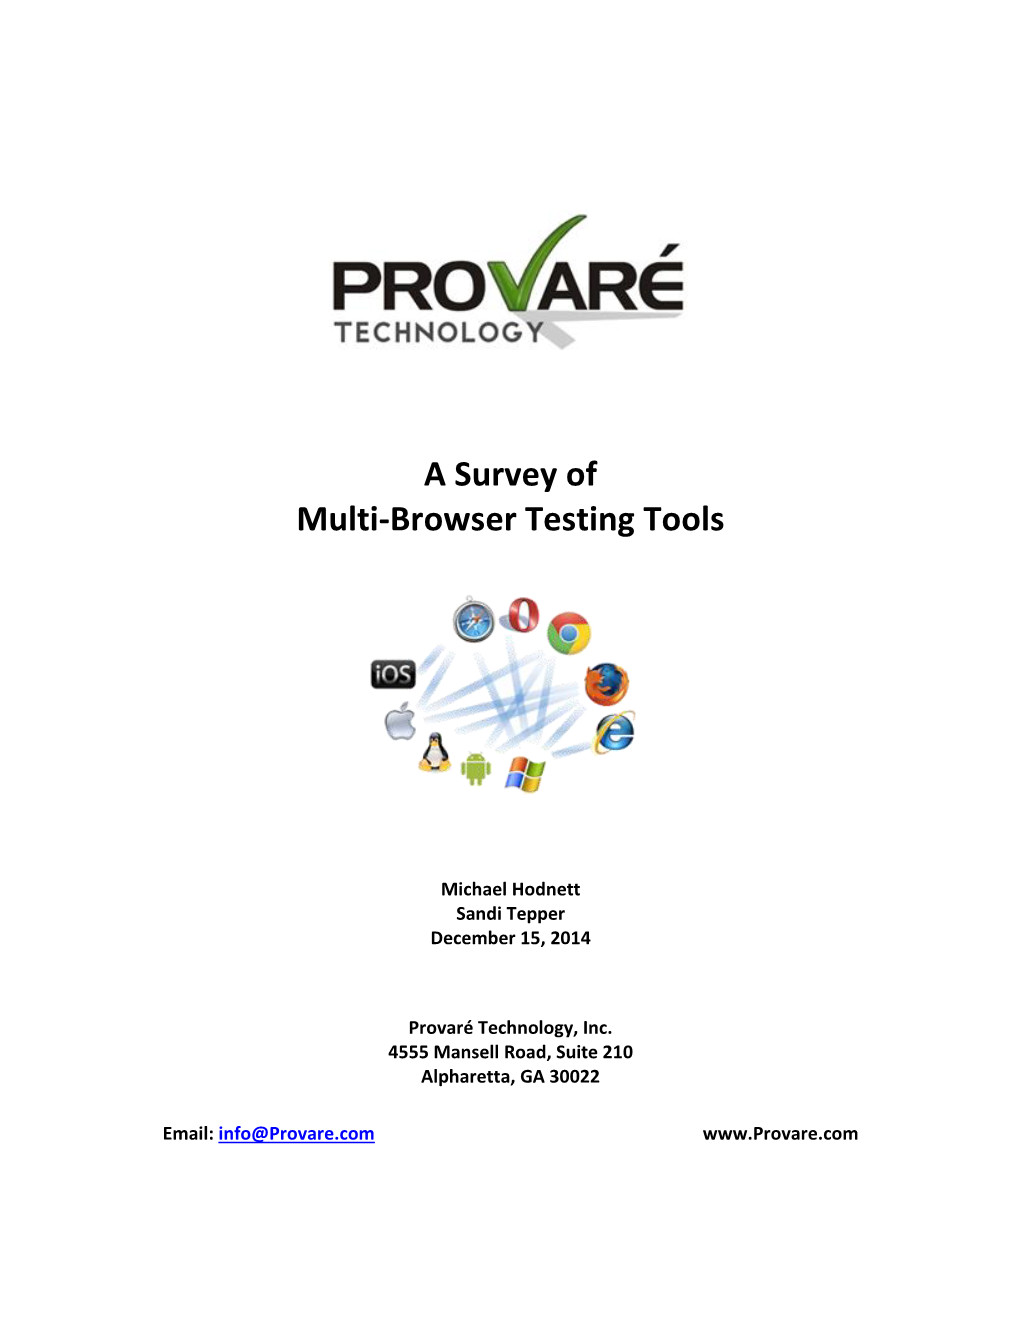 A Survey of Multi-Browser Testing Tools